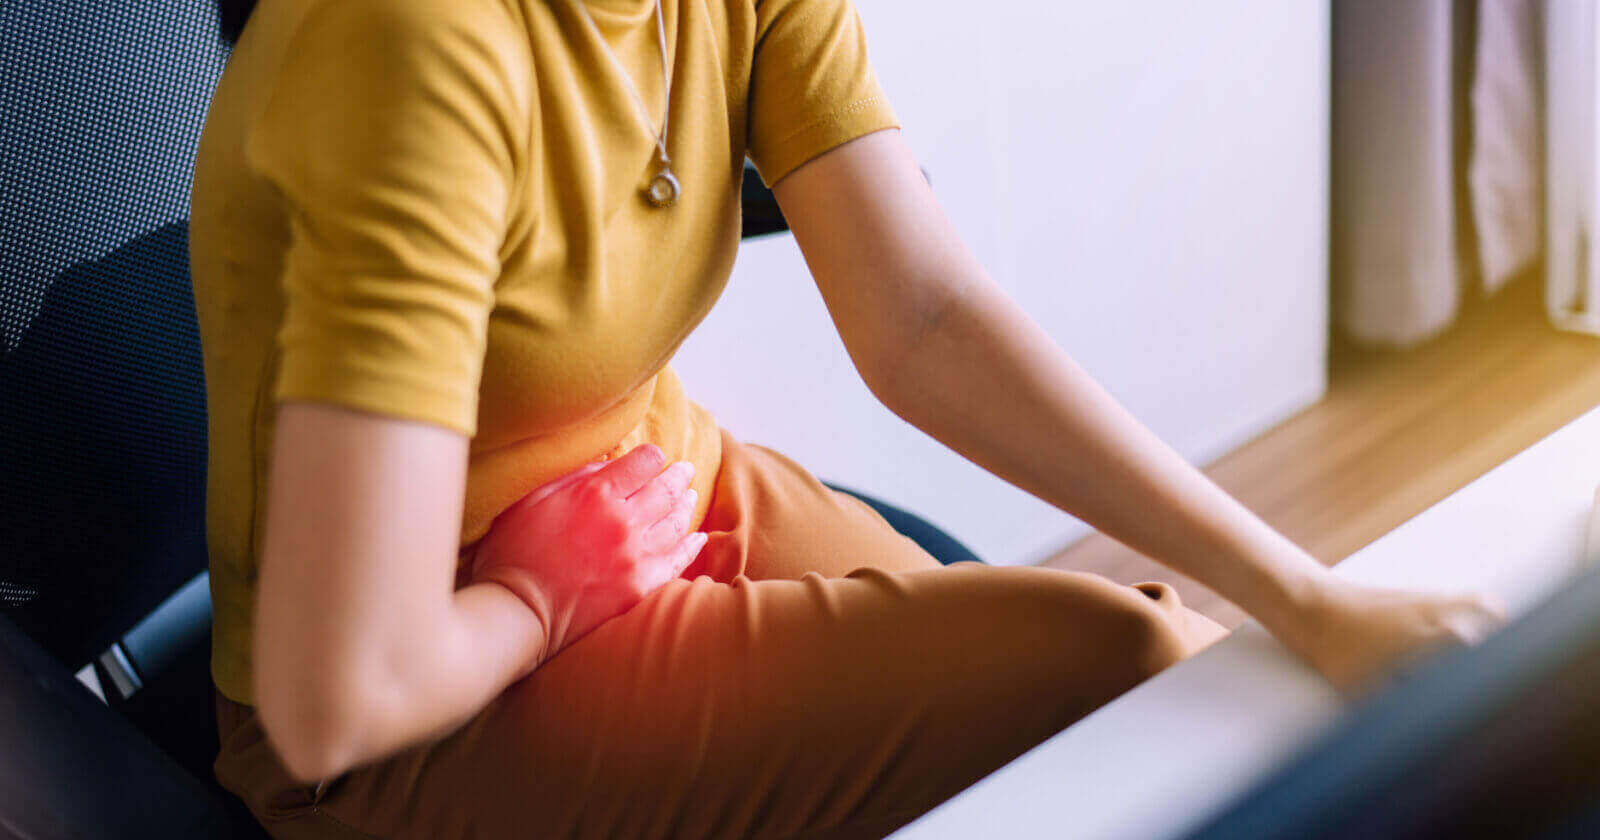 Overview of Pelvic Pain: Definition, symptoms, causes & treatment